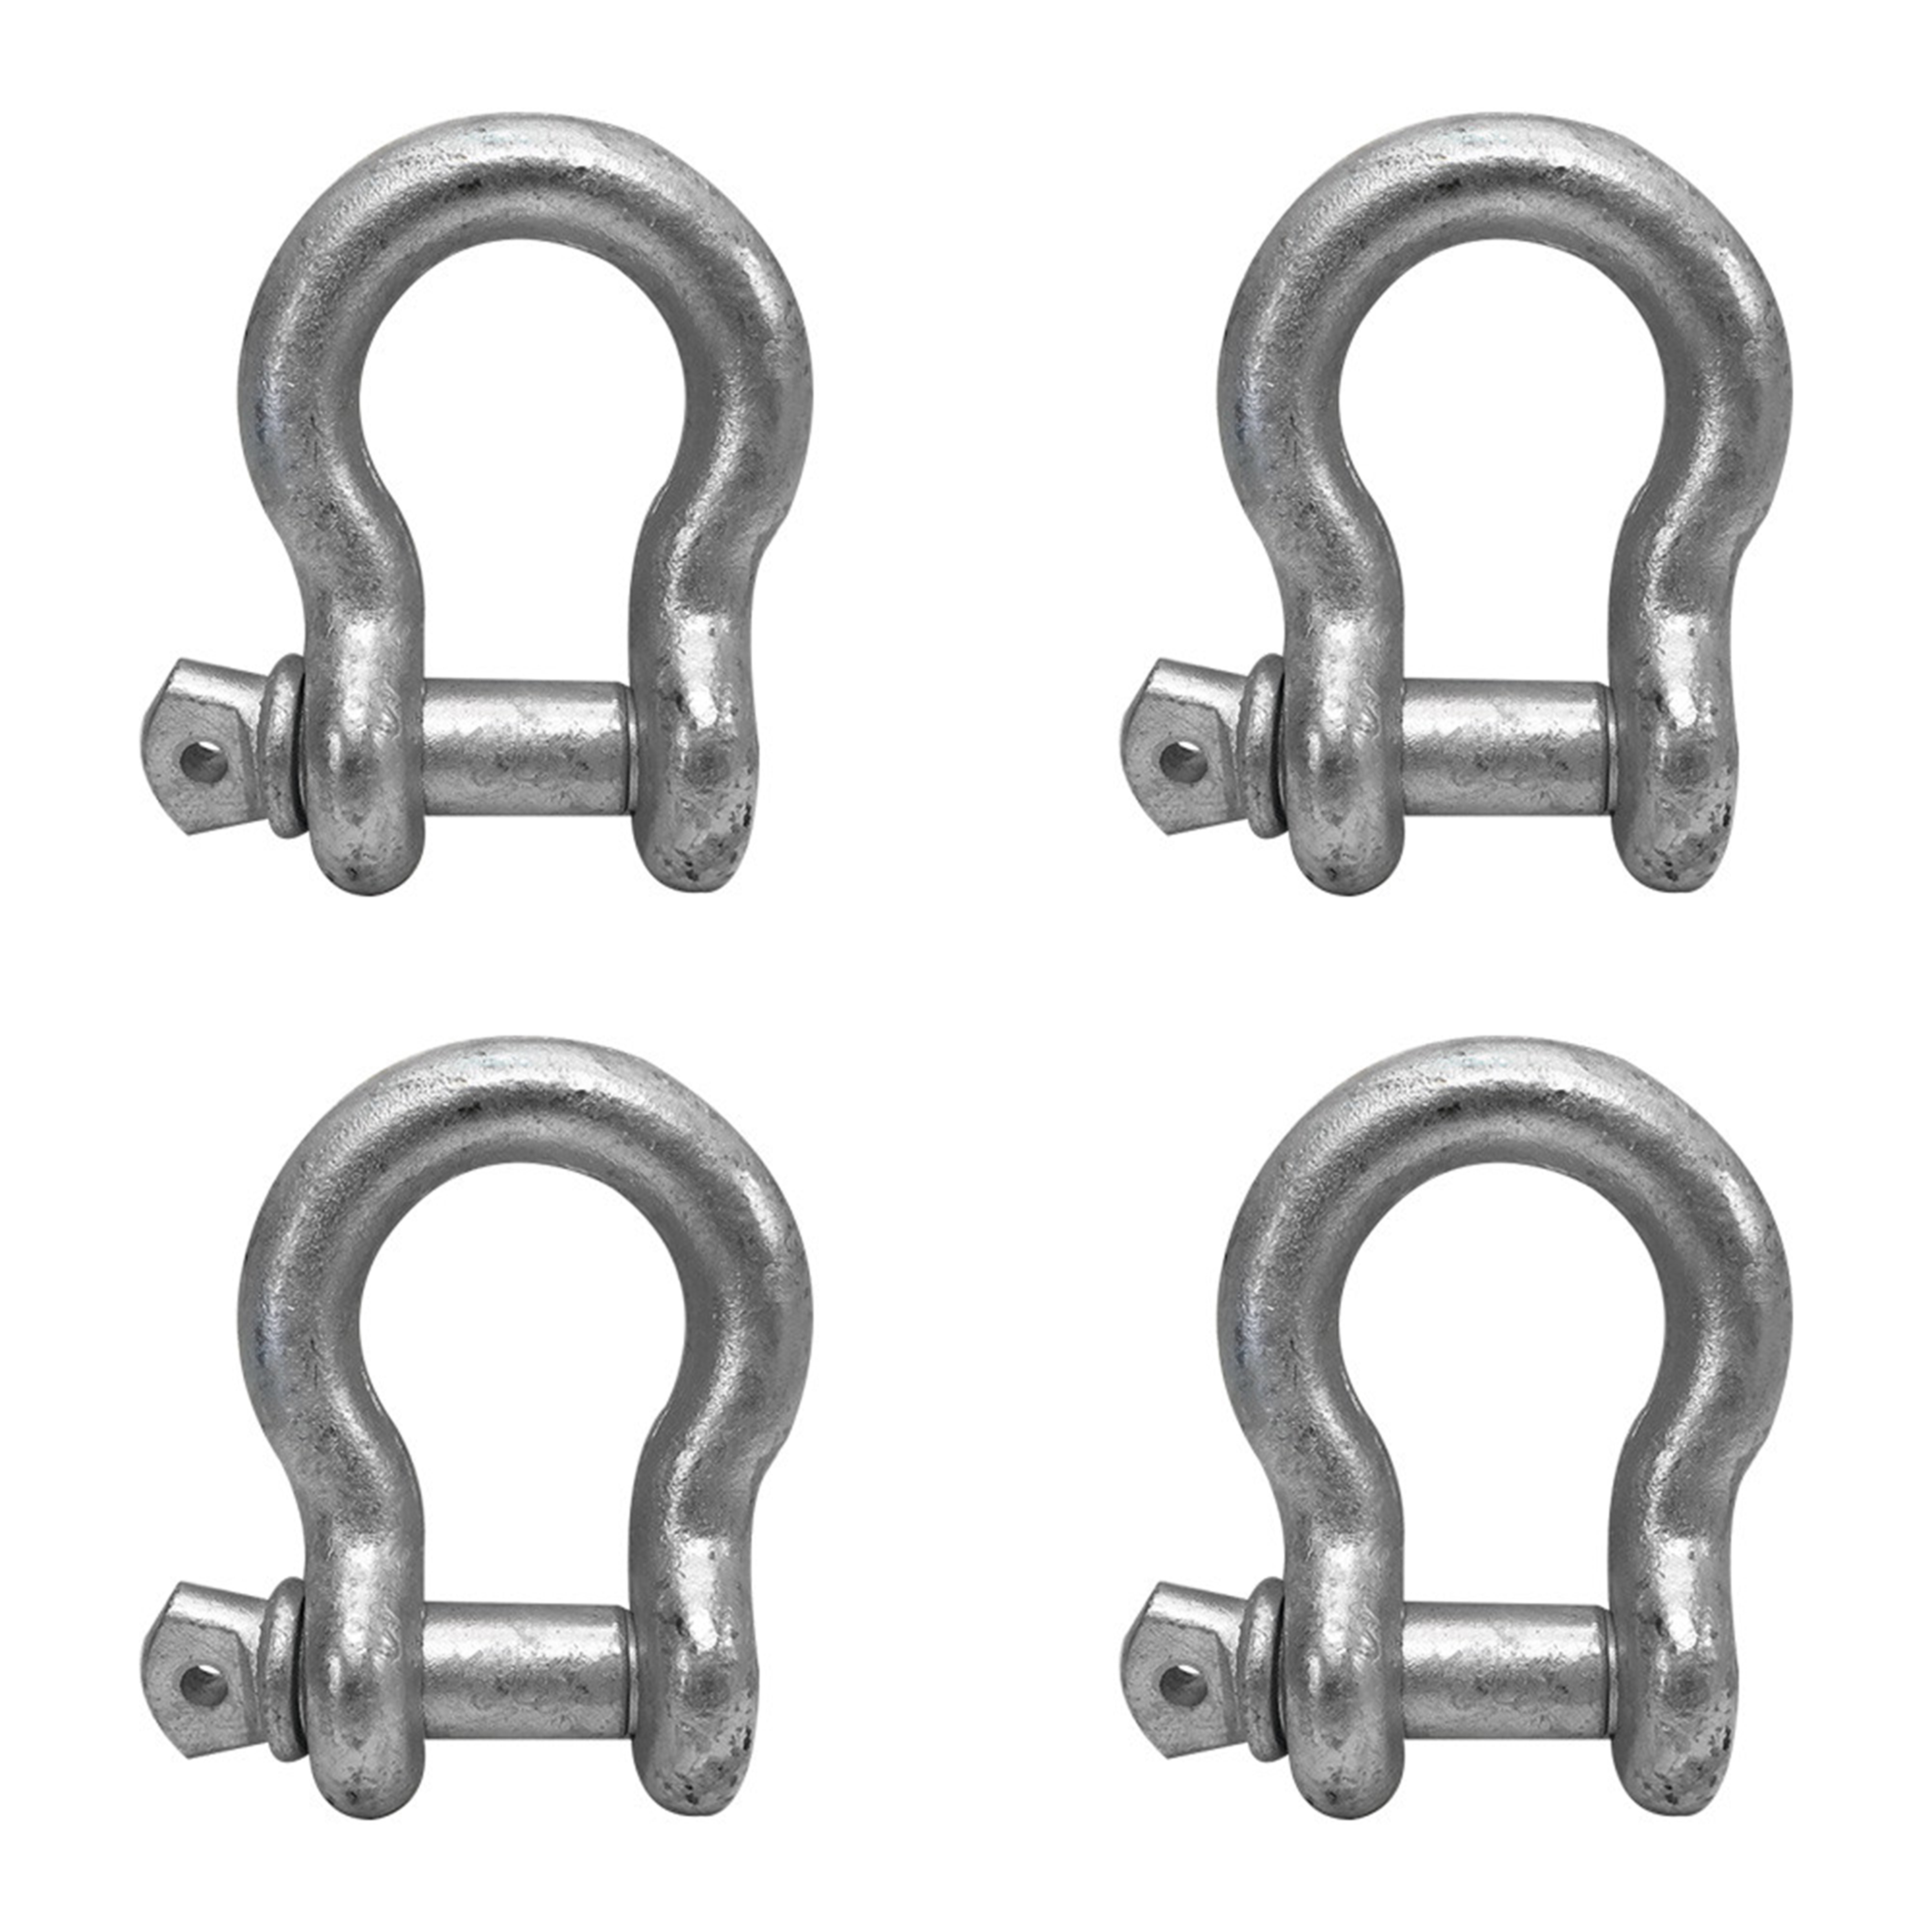 1" Screw Pin Anchor D Ring Shackle Galvanized Steel Drop Forged WLL 17000 Lbs 